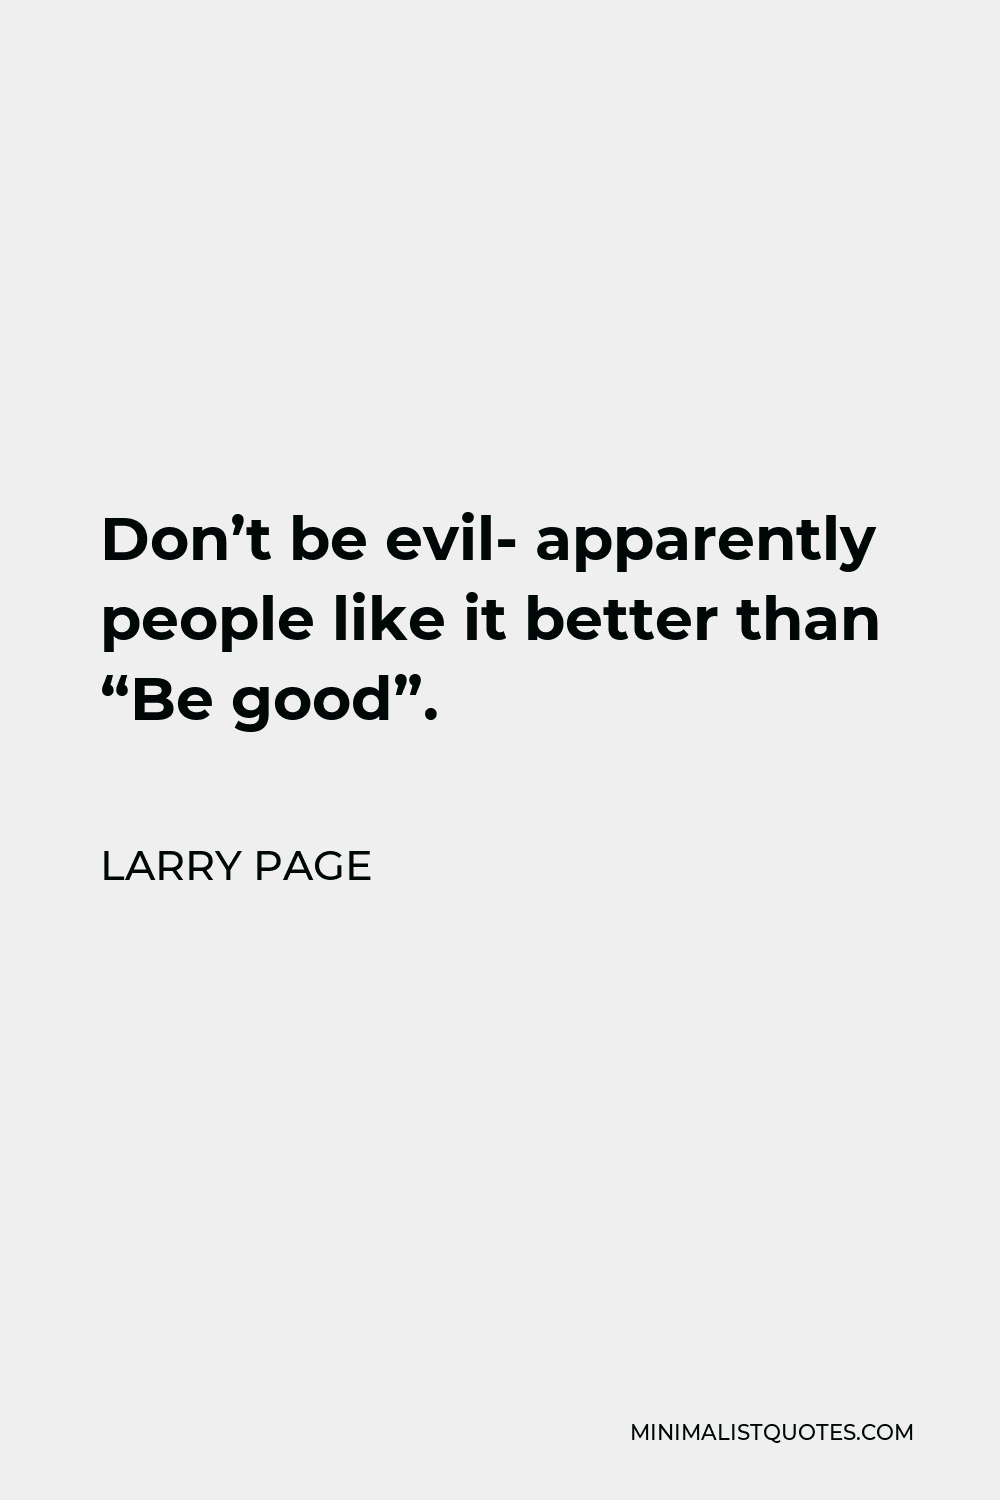 Larry Page Quote - Don’t be evil- apparently people like it better than “Be good”.